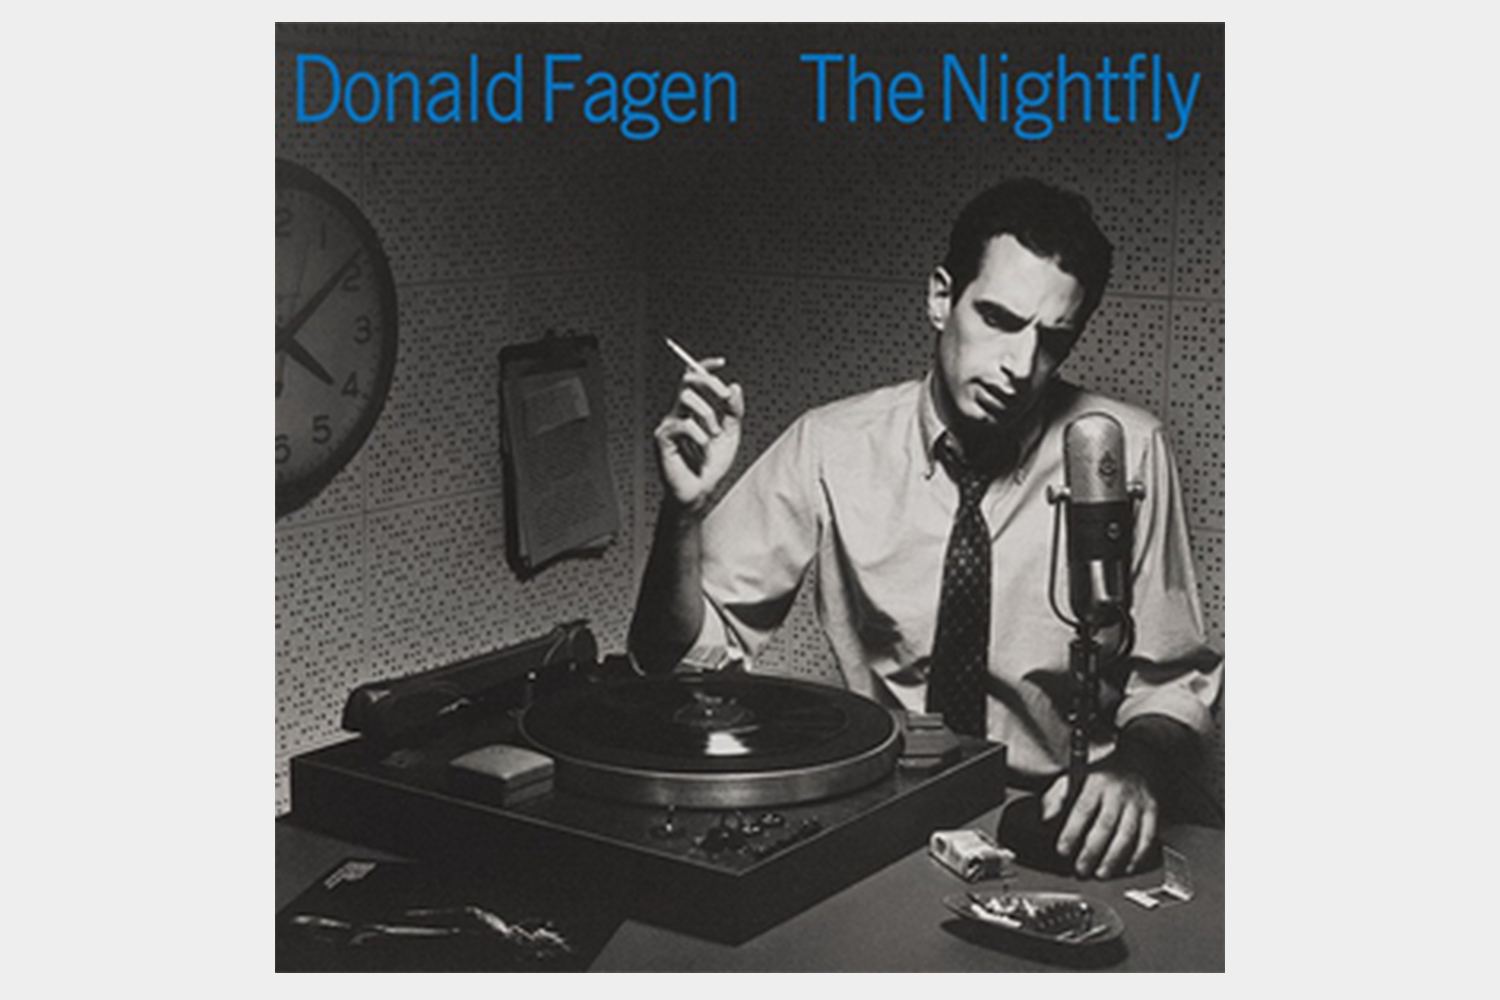 The Nightfly by Donald Fagan